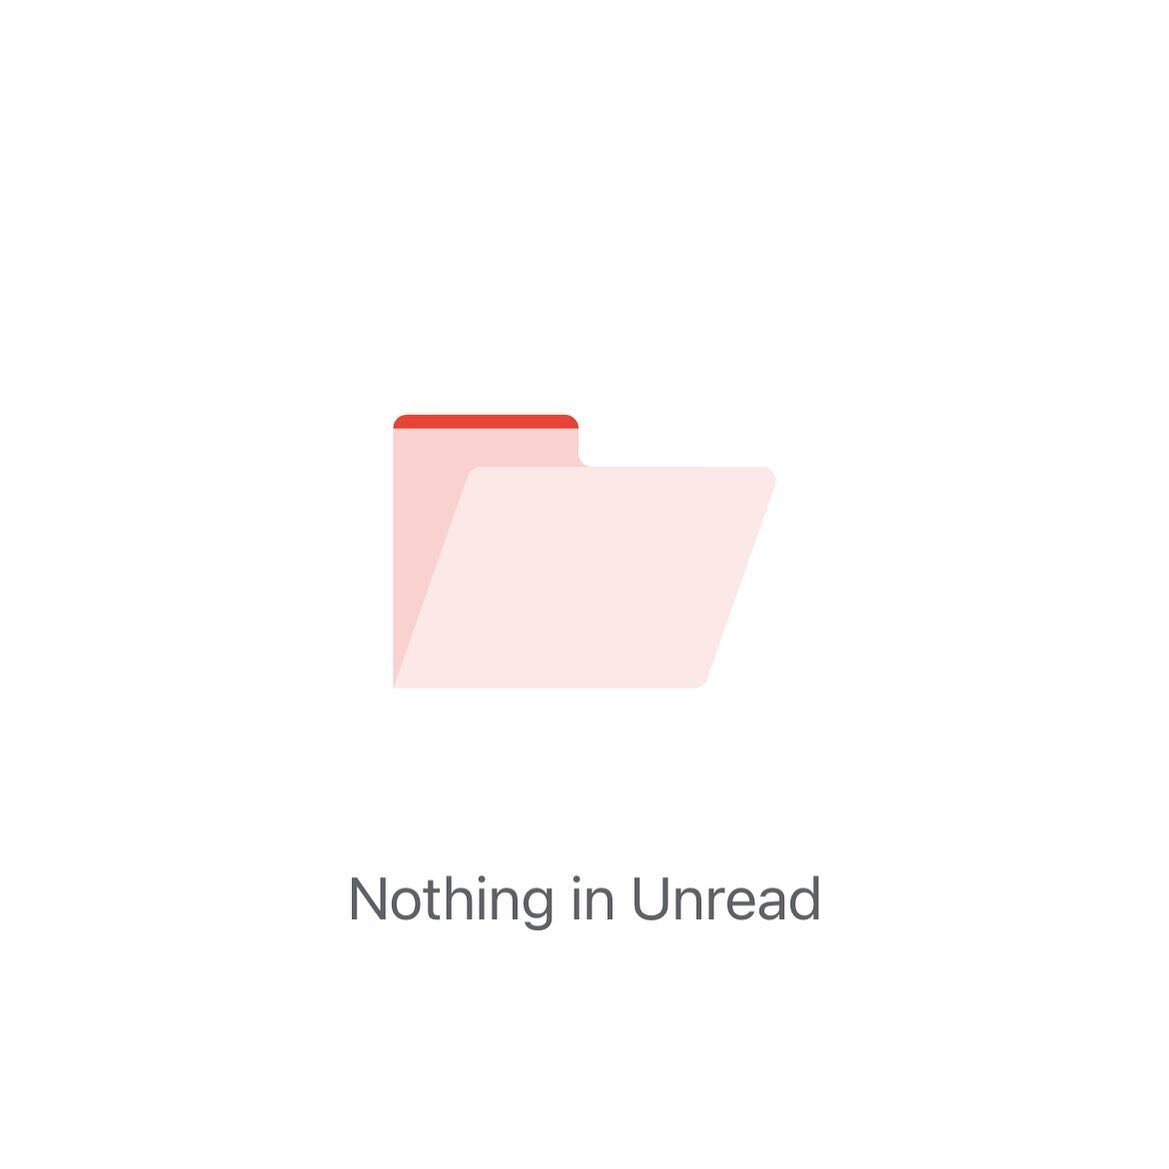 I&rsquo;ve never really been a huge proponent of &ldquo;inbox zero&rdquo;. But here we are anyhow! Now that we are&hellip; I&rsquo;m finding it easier to stay here and finding it to be a bit of a stress reliever to get everything handled and out of s